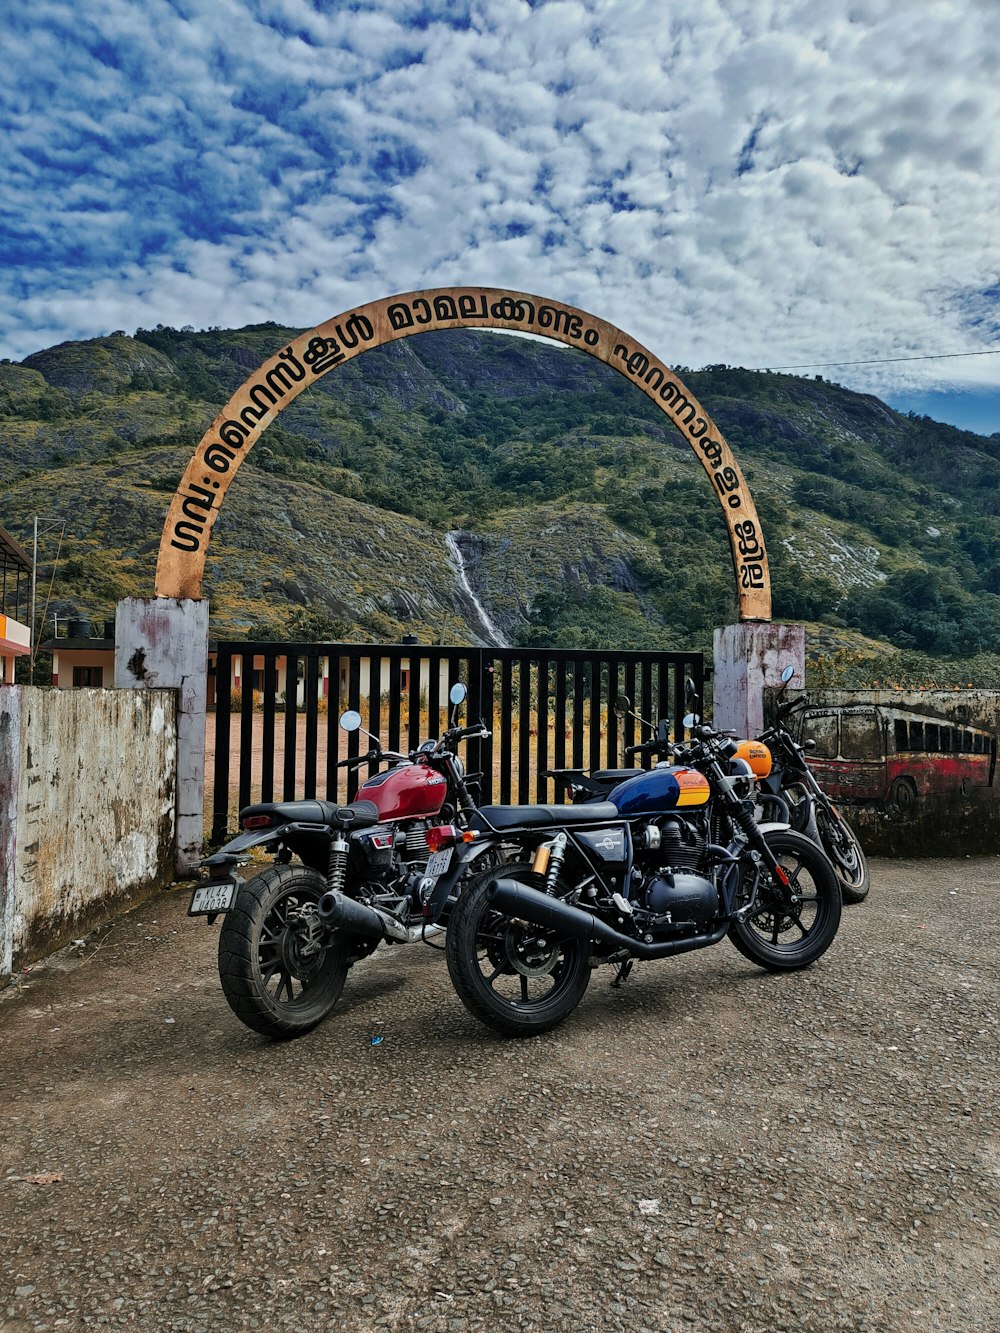 two motorcycles are parked in front of a gate